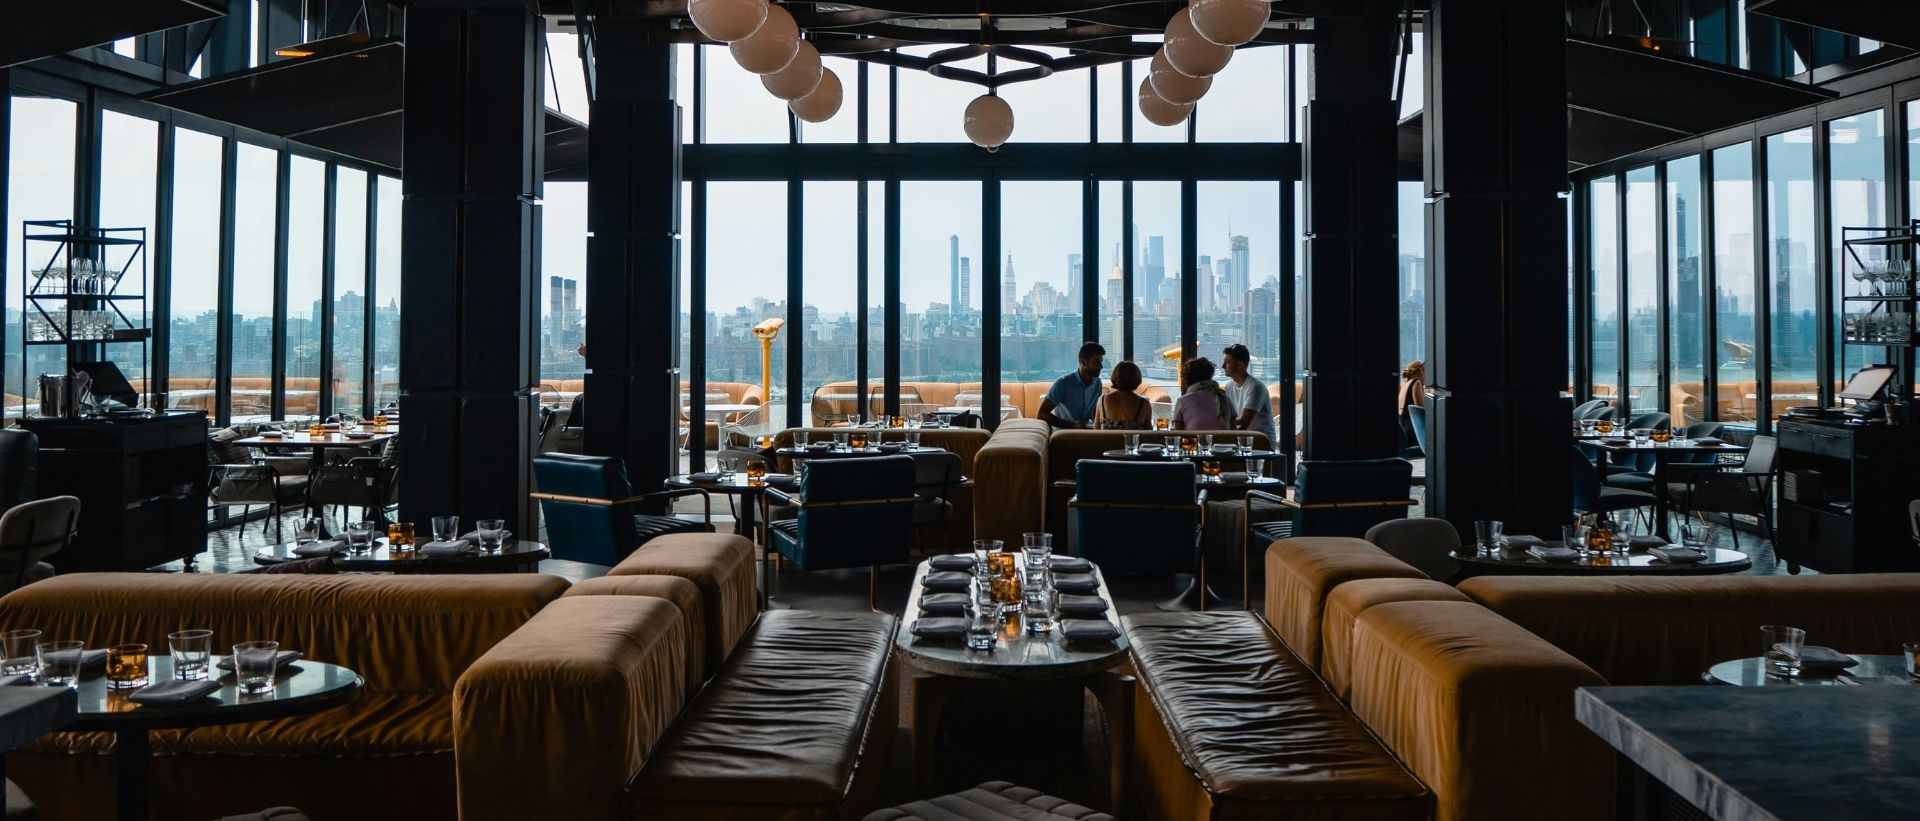 How Dishoom dishes up the industry standard for staff retention